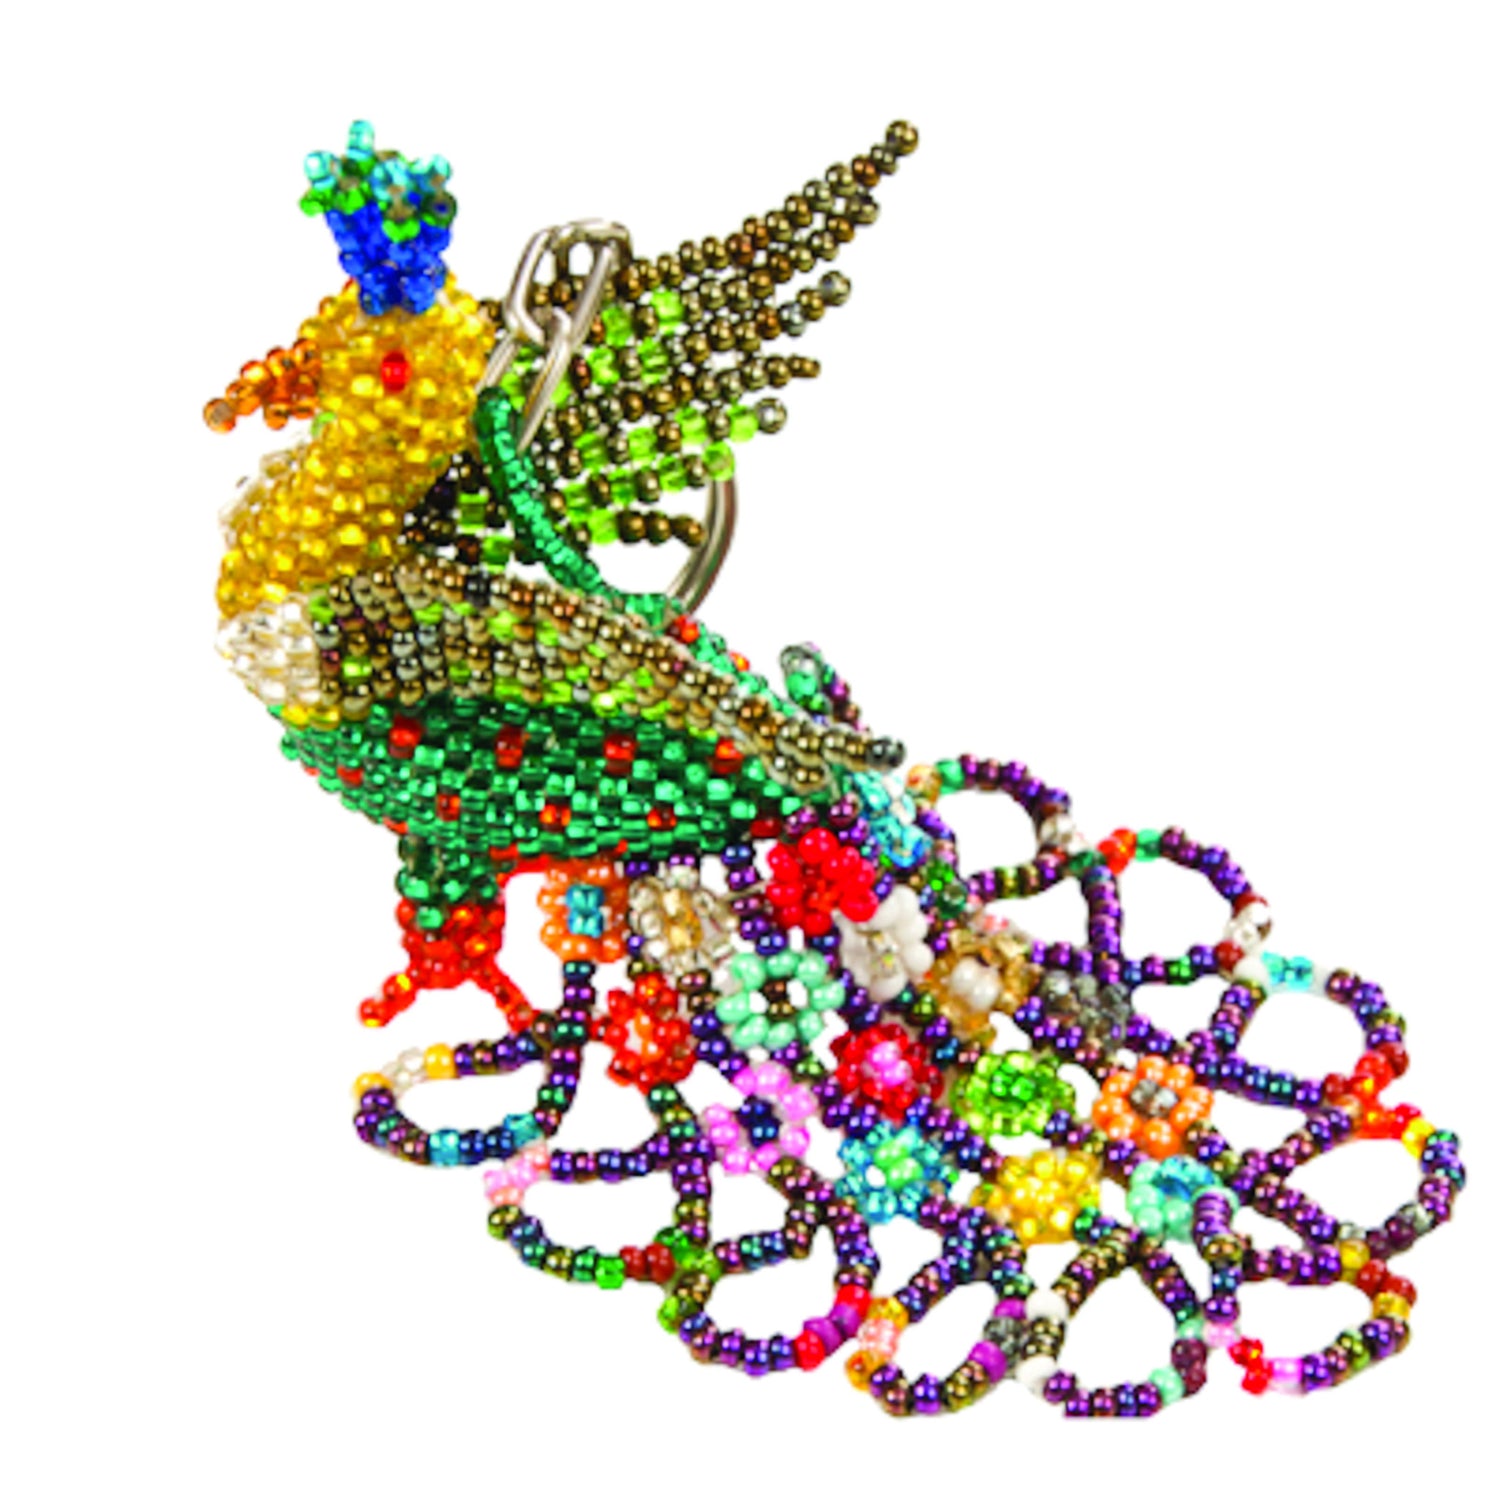 Hand-Beaded Glass Peacock Ornaments from Guatemala Pair 'Real Beauty' -  International Medical Corps